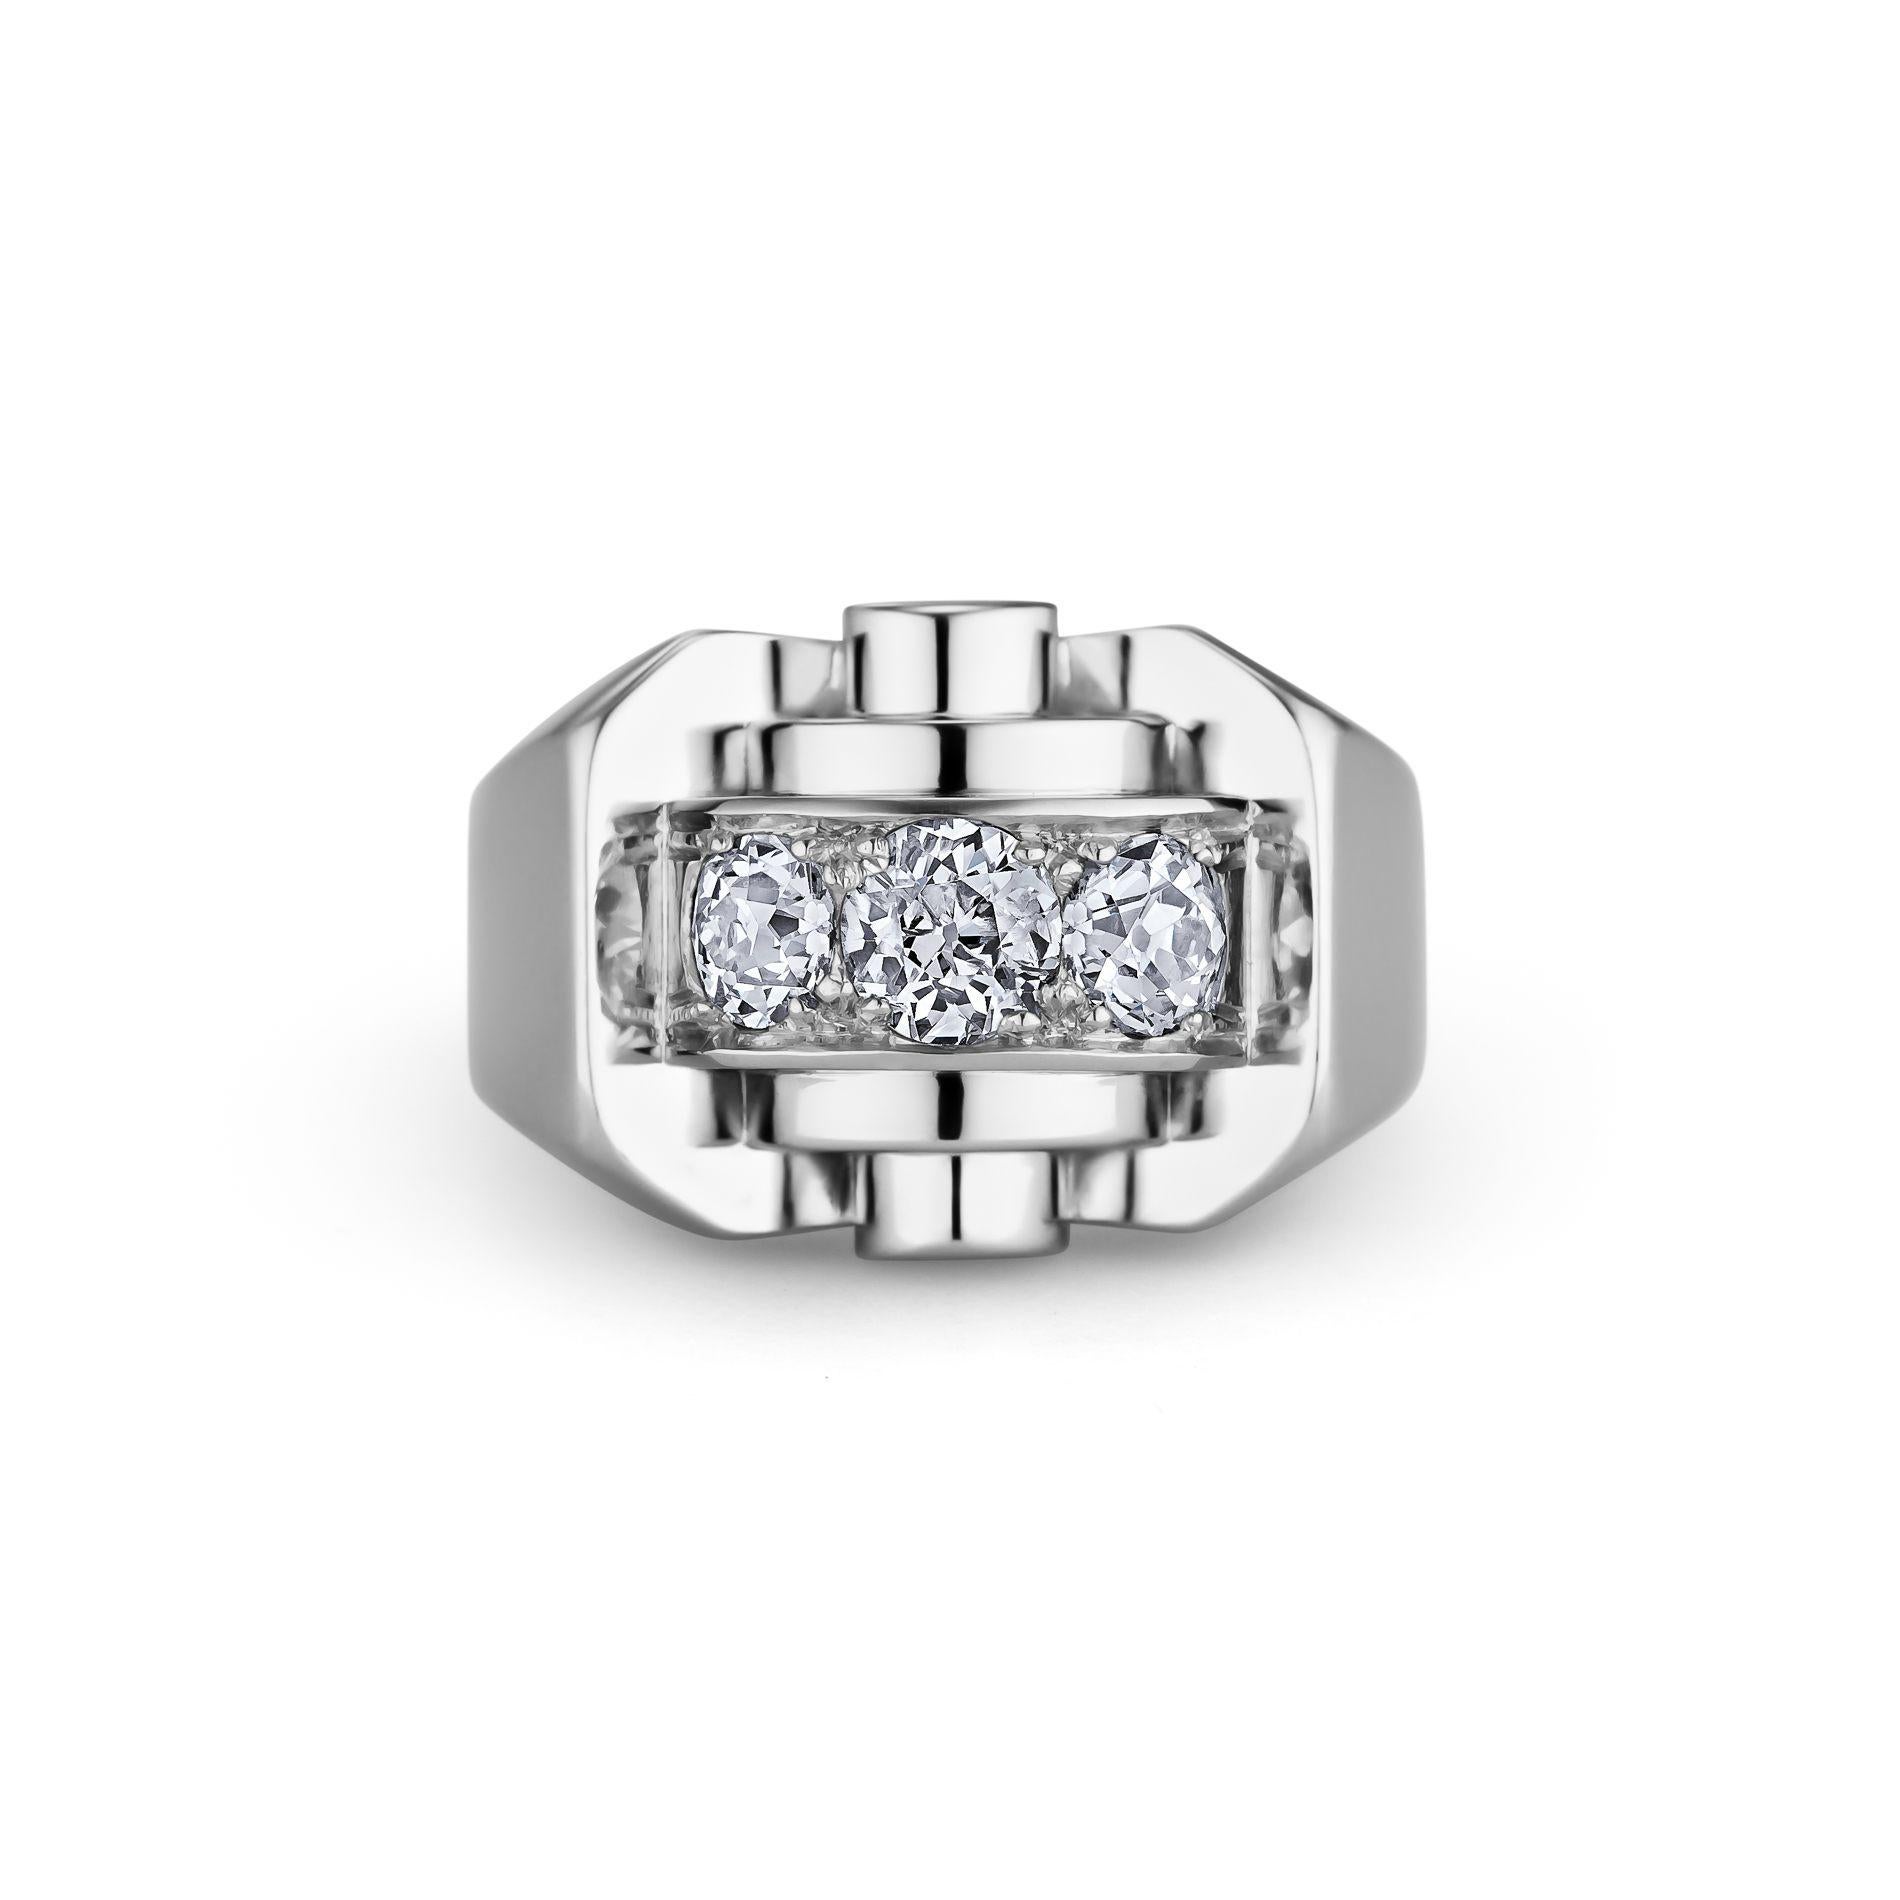 With bold Art Deco architectural elements reminiscent of period skyscrapers, this domed ring attributed to Rene Boivin Paris, is a song in symmetry.  The three round center diamonds, totaling .92 carats, are highlighted by front and back concentric